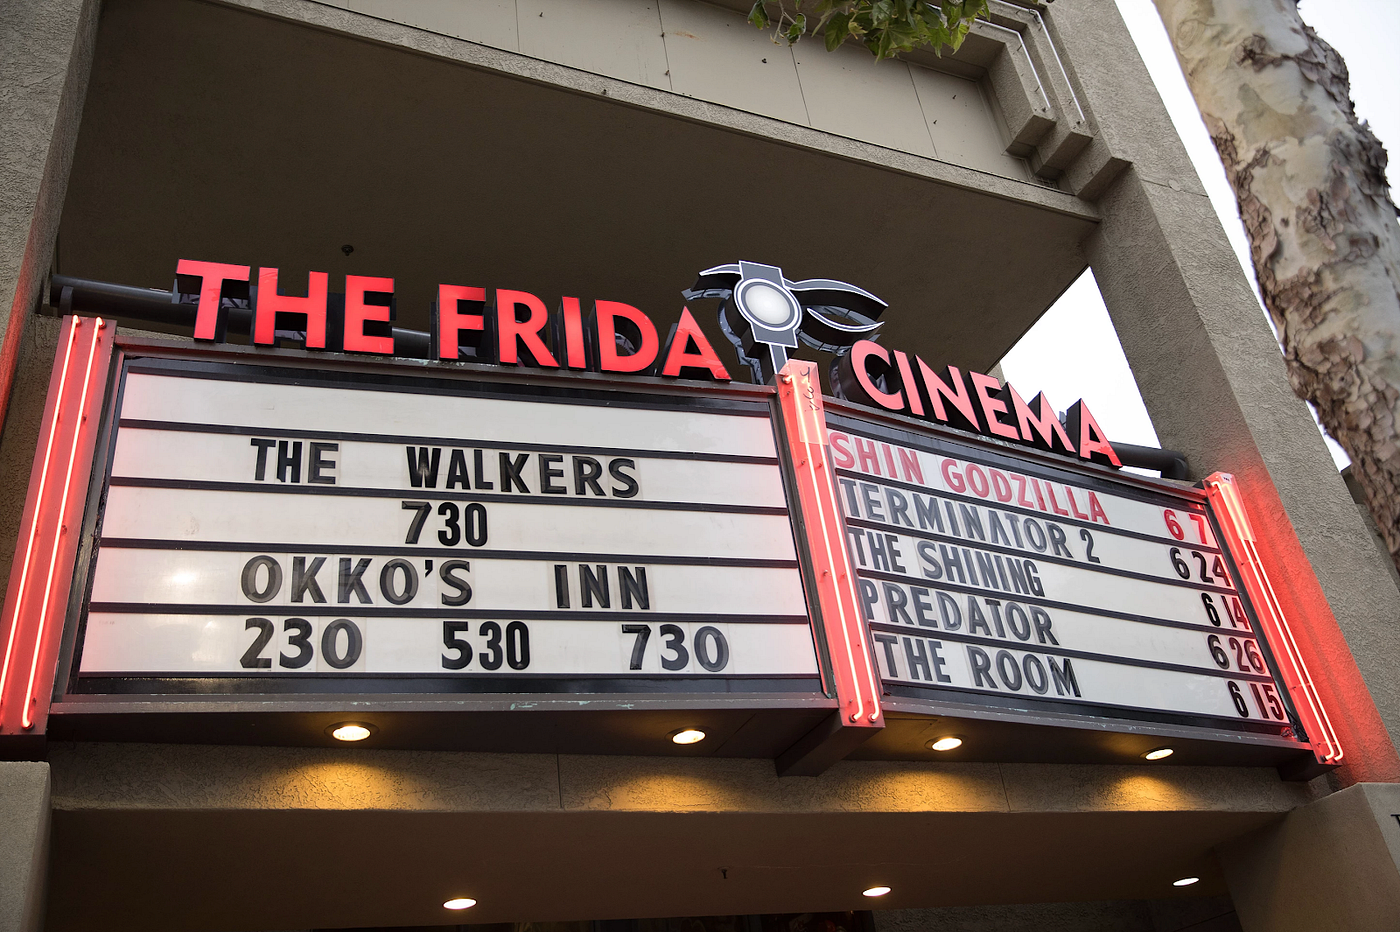 box office title with cinema name in red at the top: THE FRIDA CINEMA. Shows include “THE WALKERS 7:30”